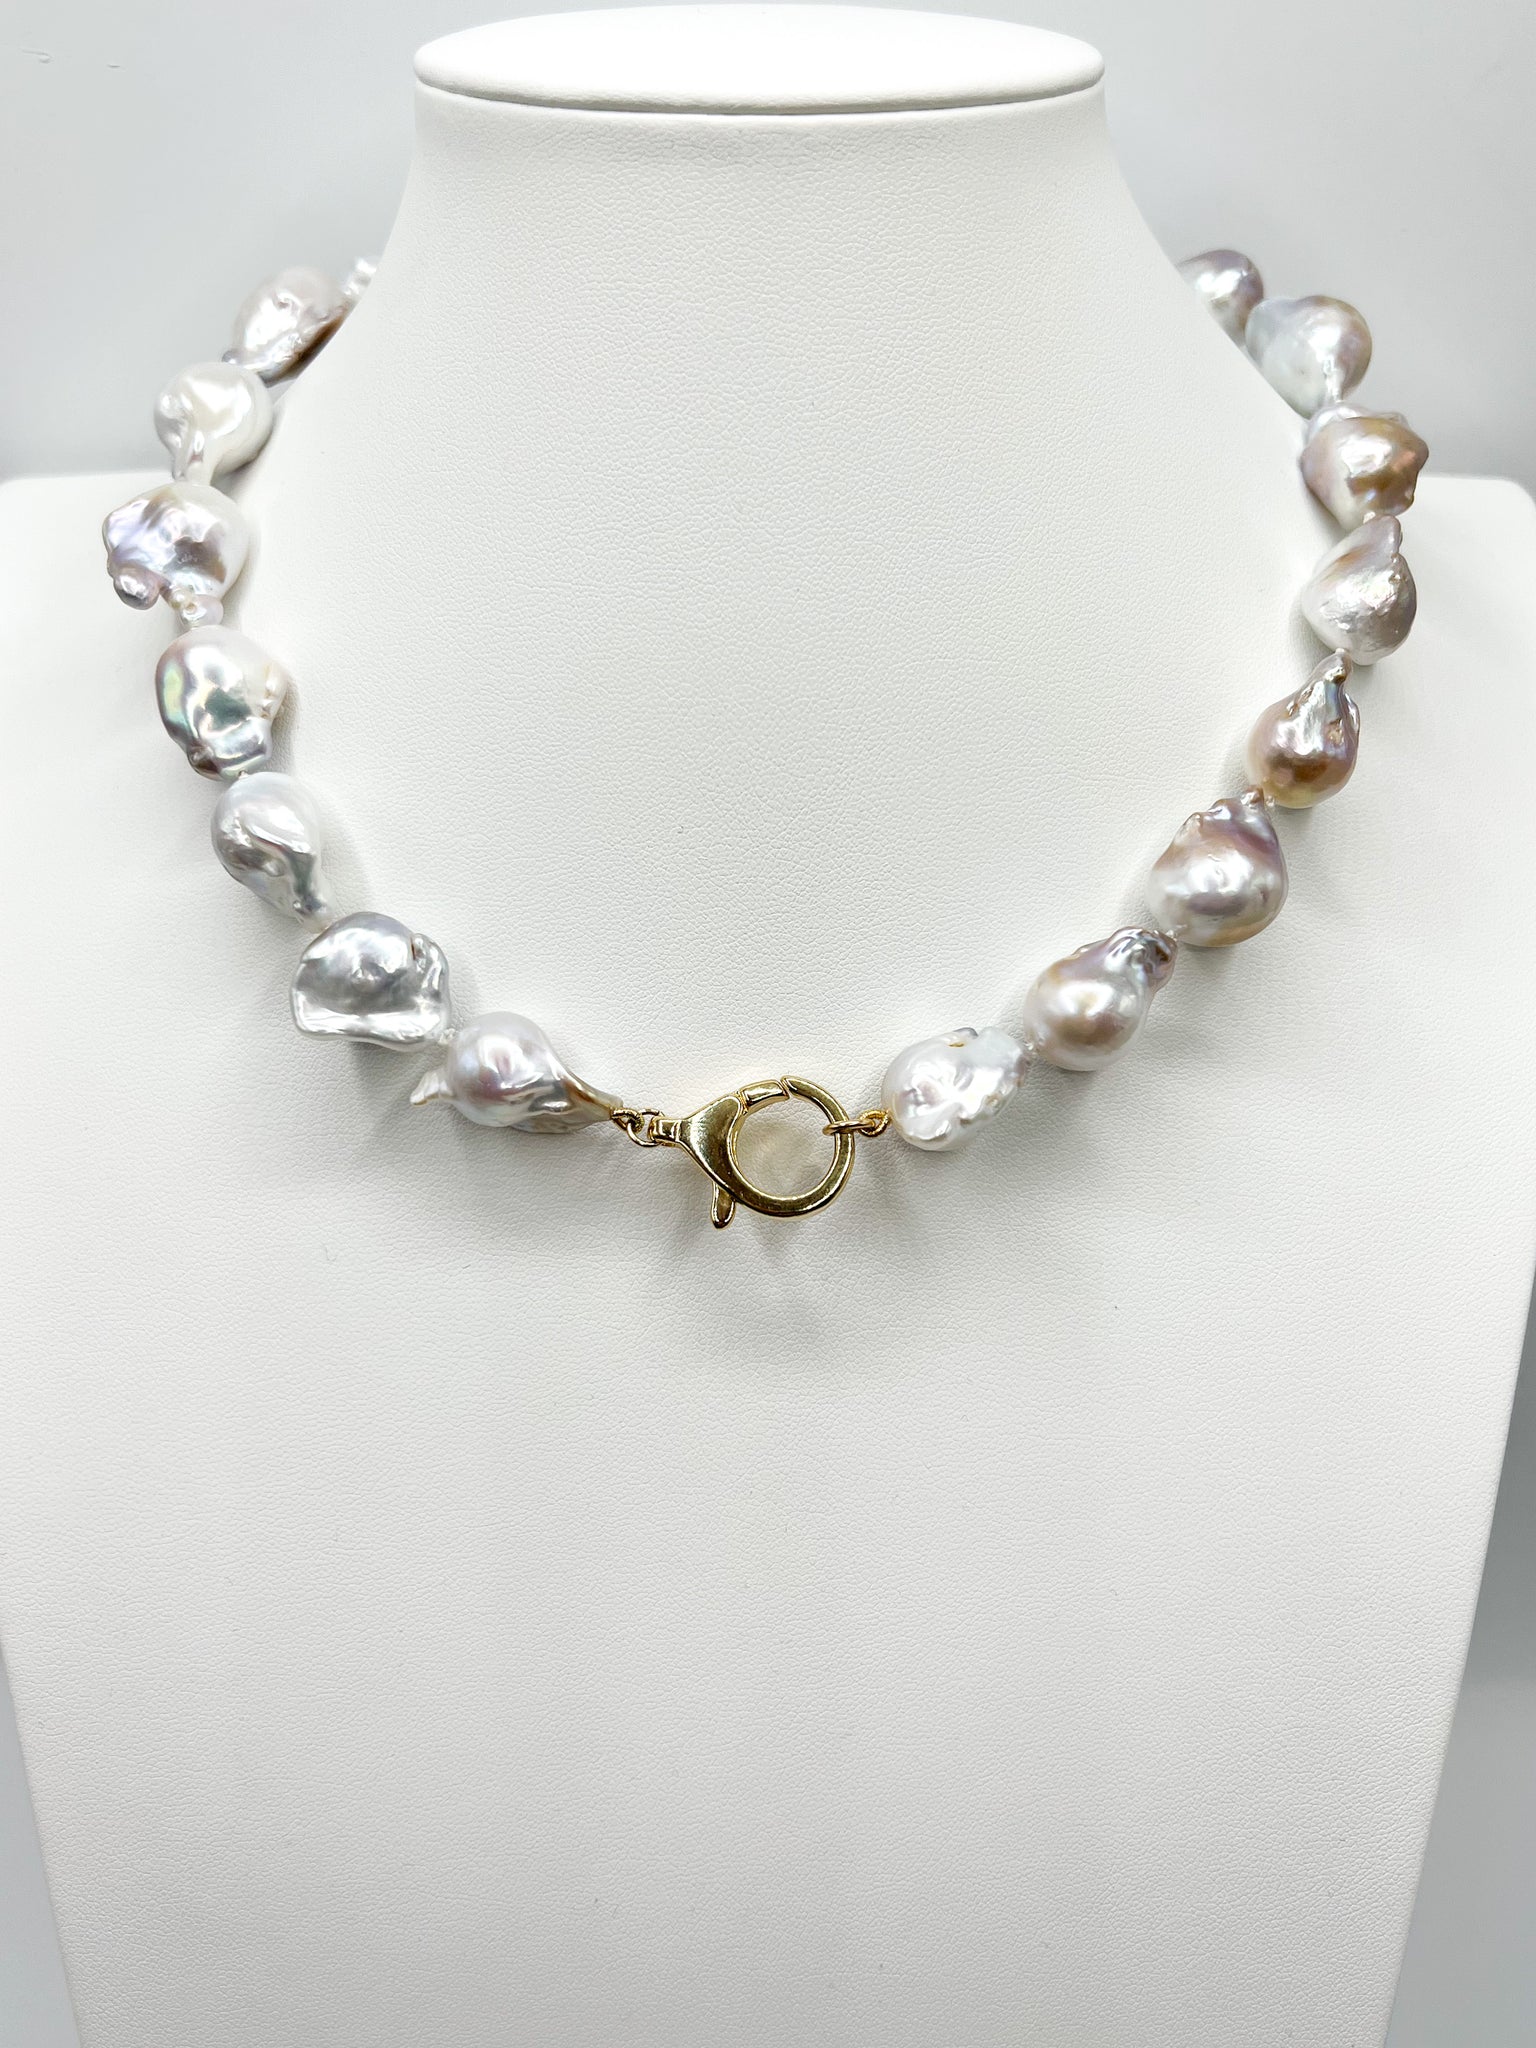 The Divna necklace